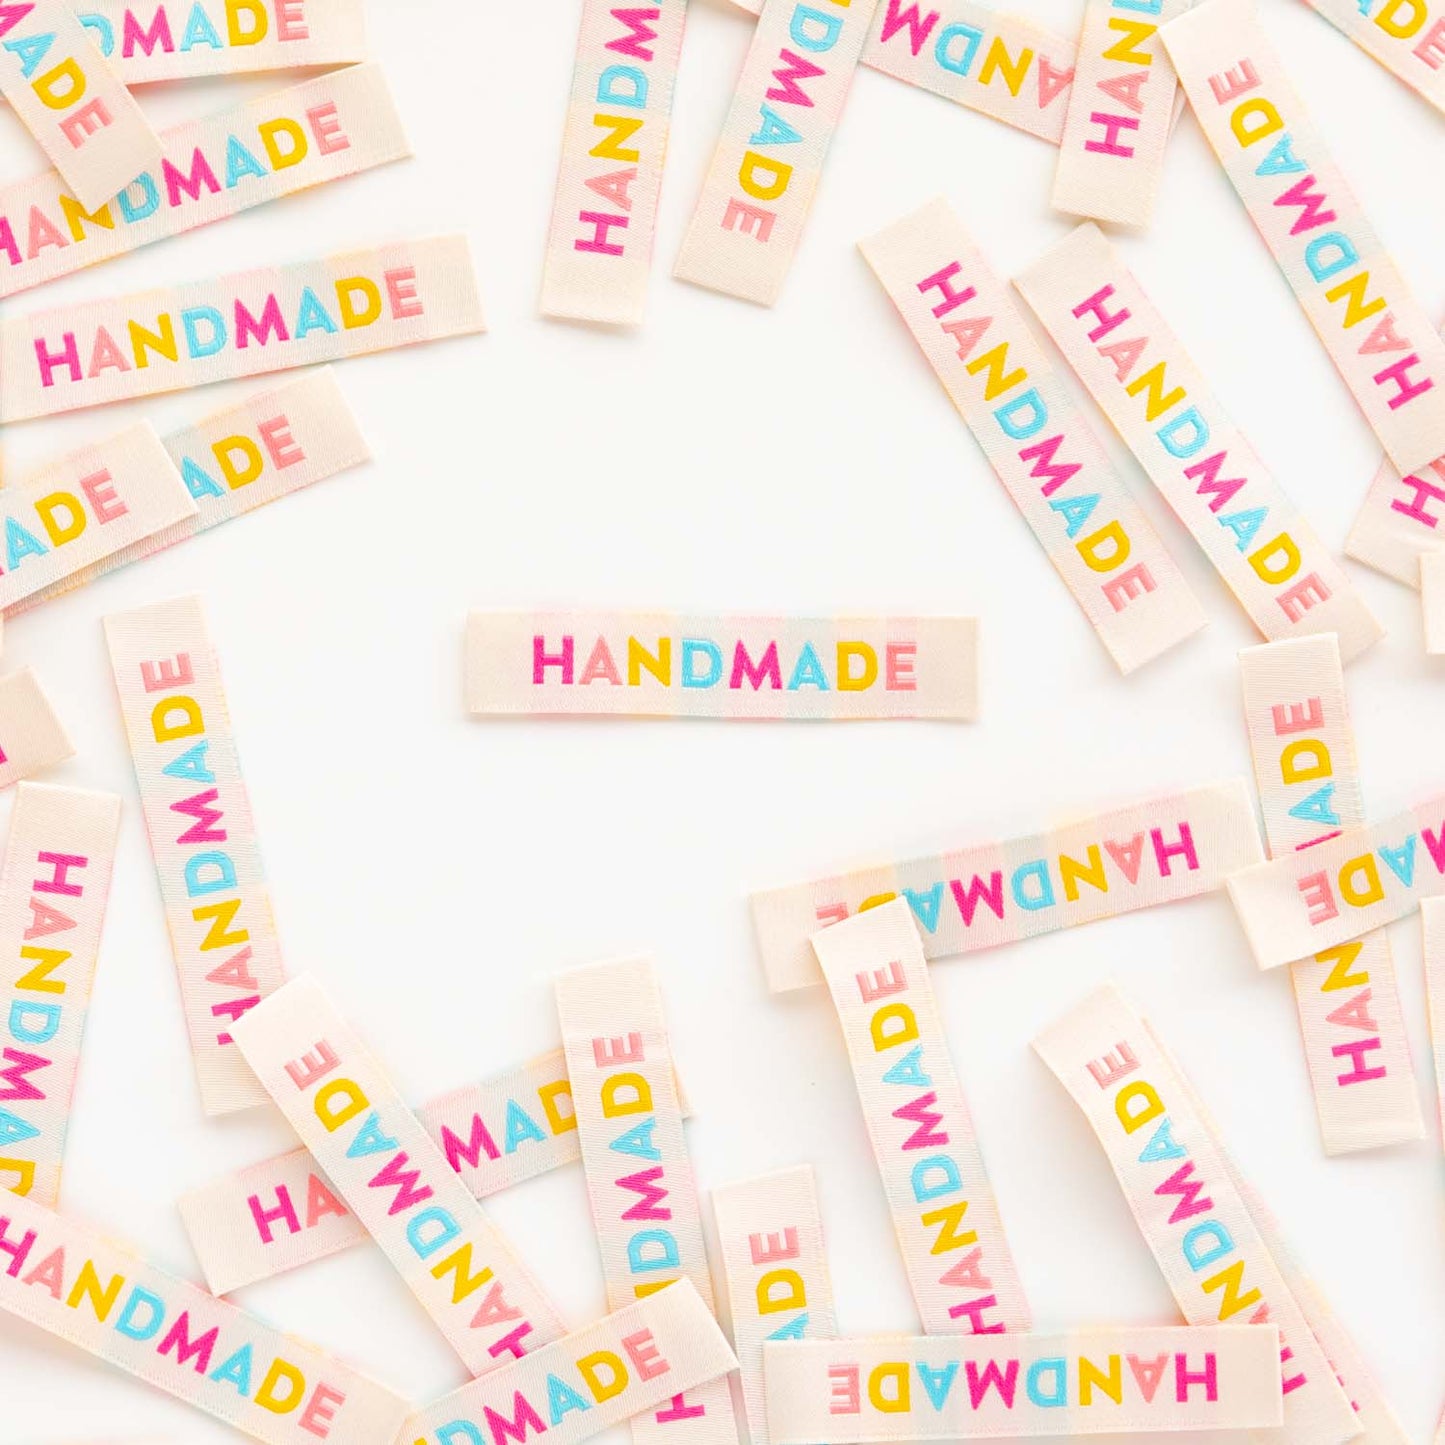 "Handmade" - Premium Woven Labels by Sarah Hearts